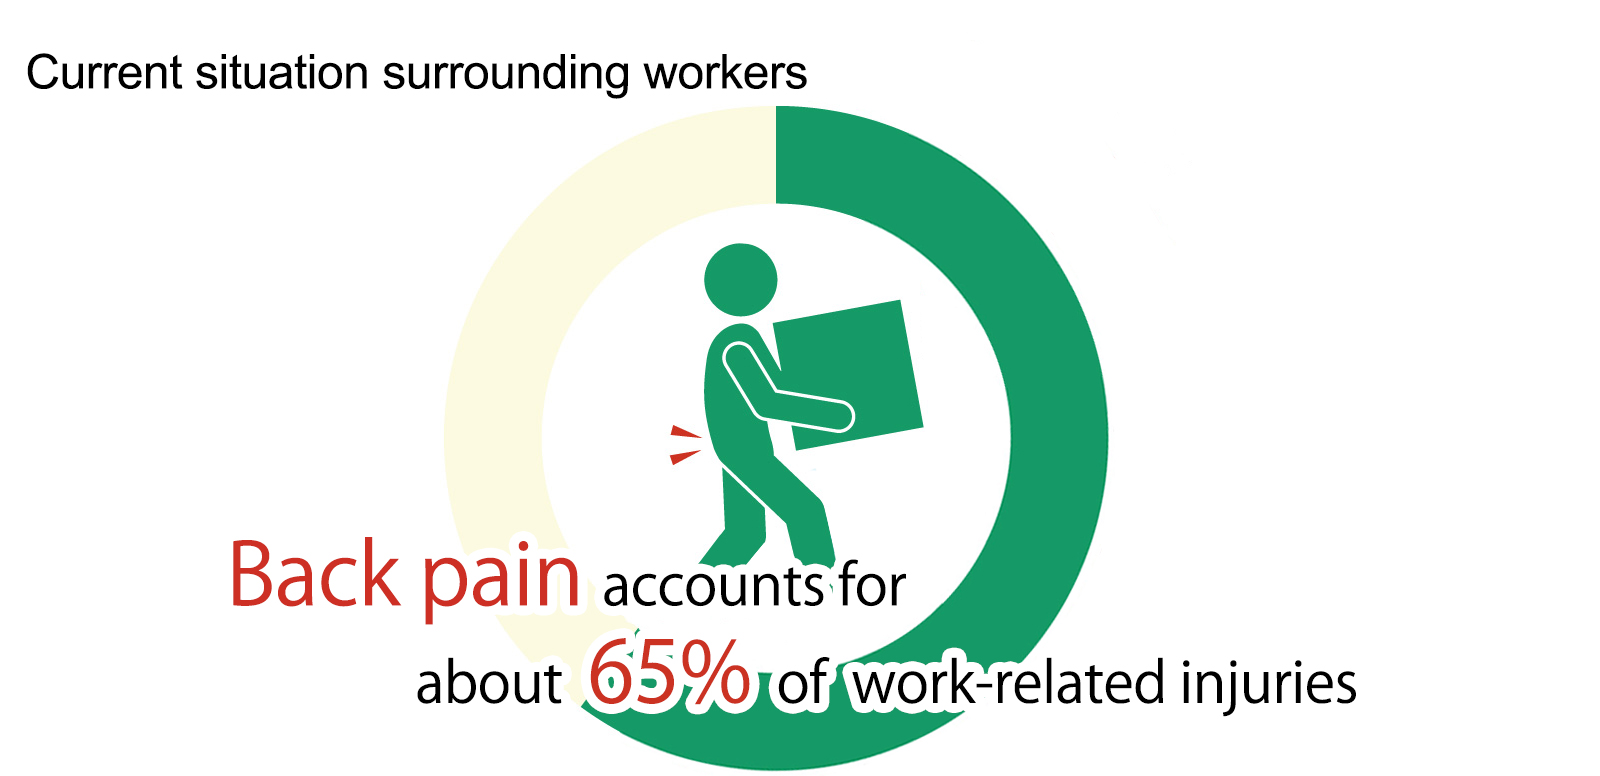 Back pain accounts for about 65% of work-related injuries